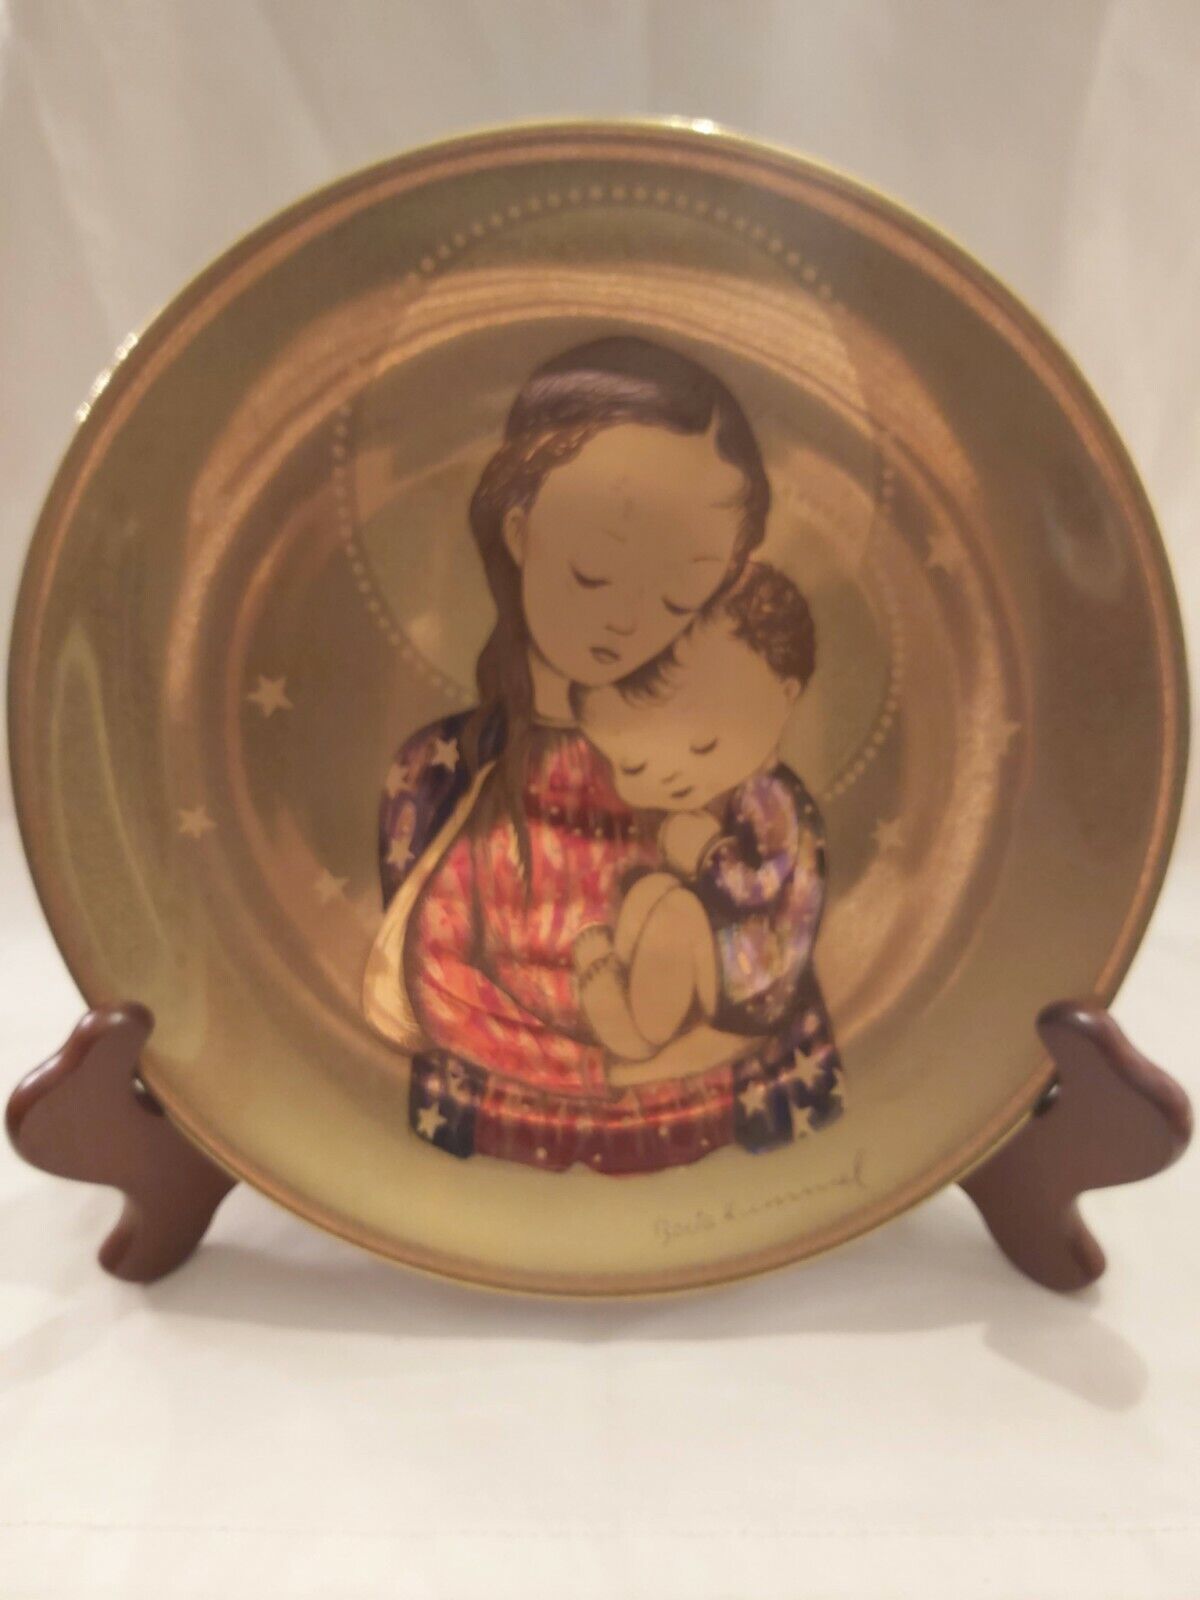 Schmid 1978 Tranquility Sister Berta Hummel limited production collectors plate